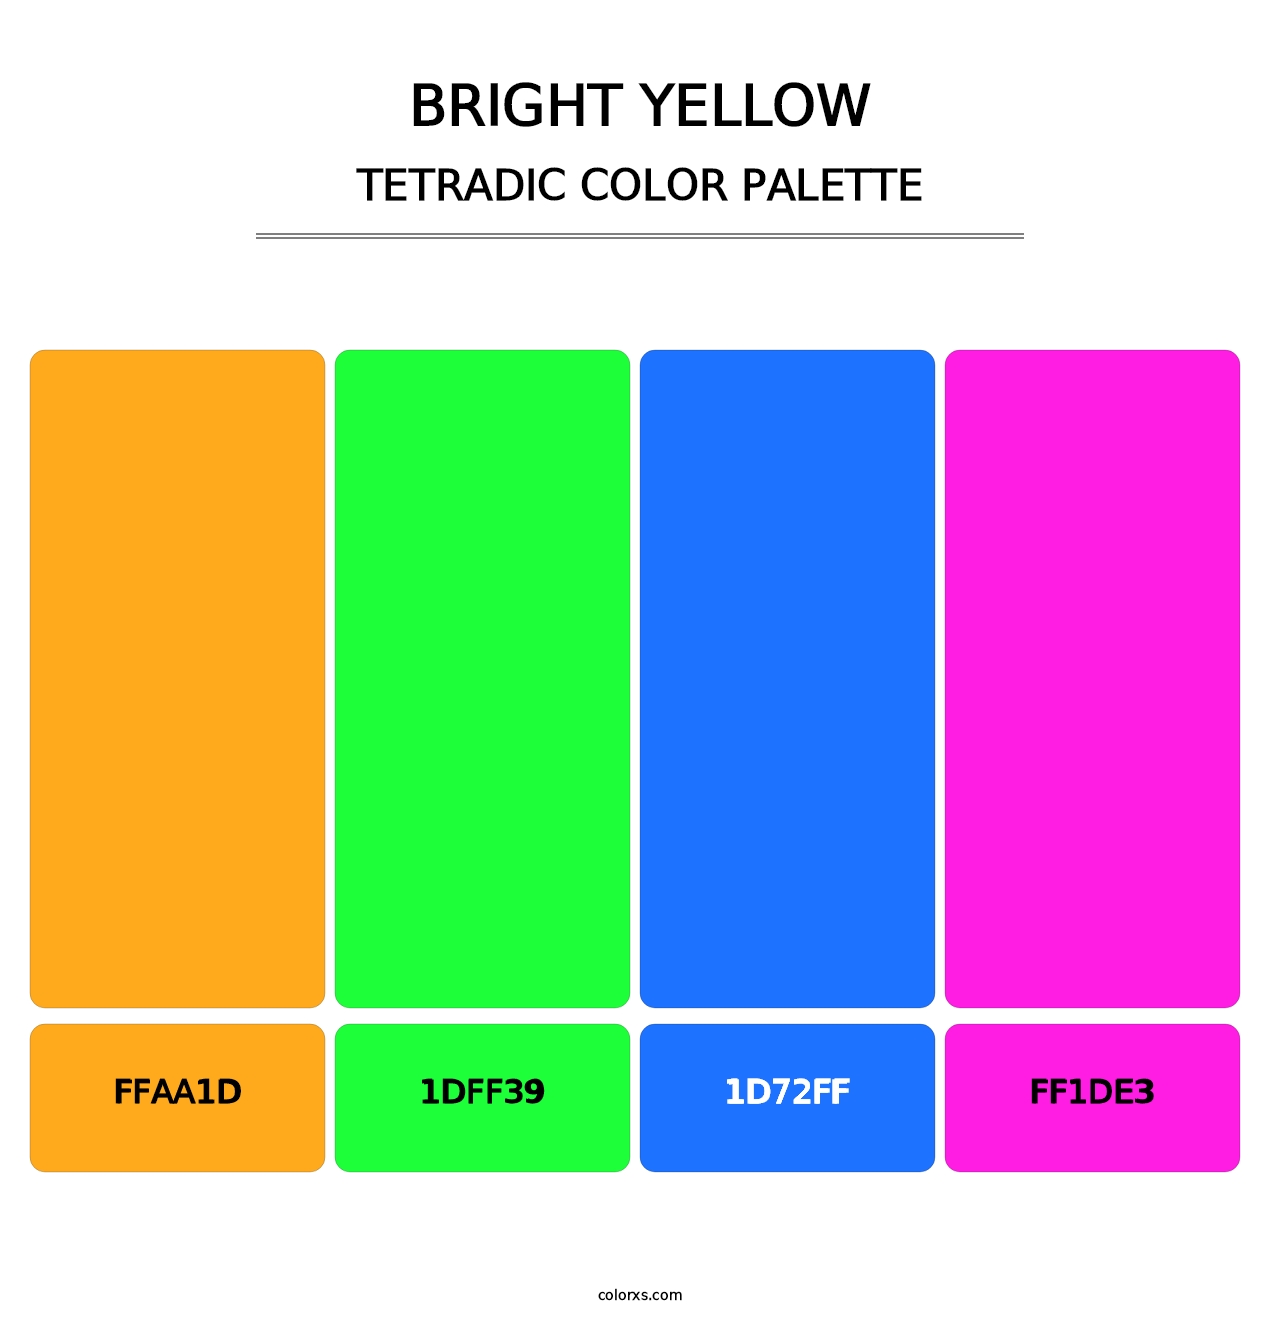 Bright Yellow - Tetradic Color Palette